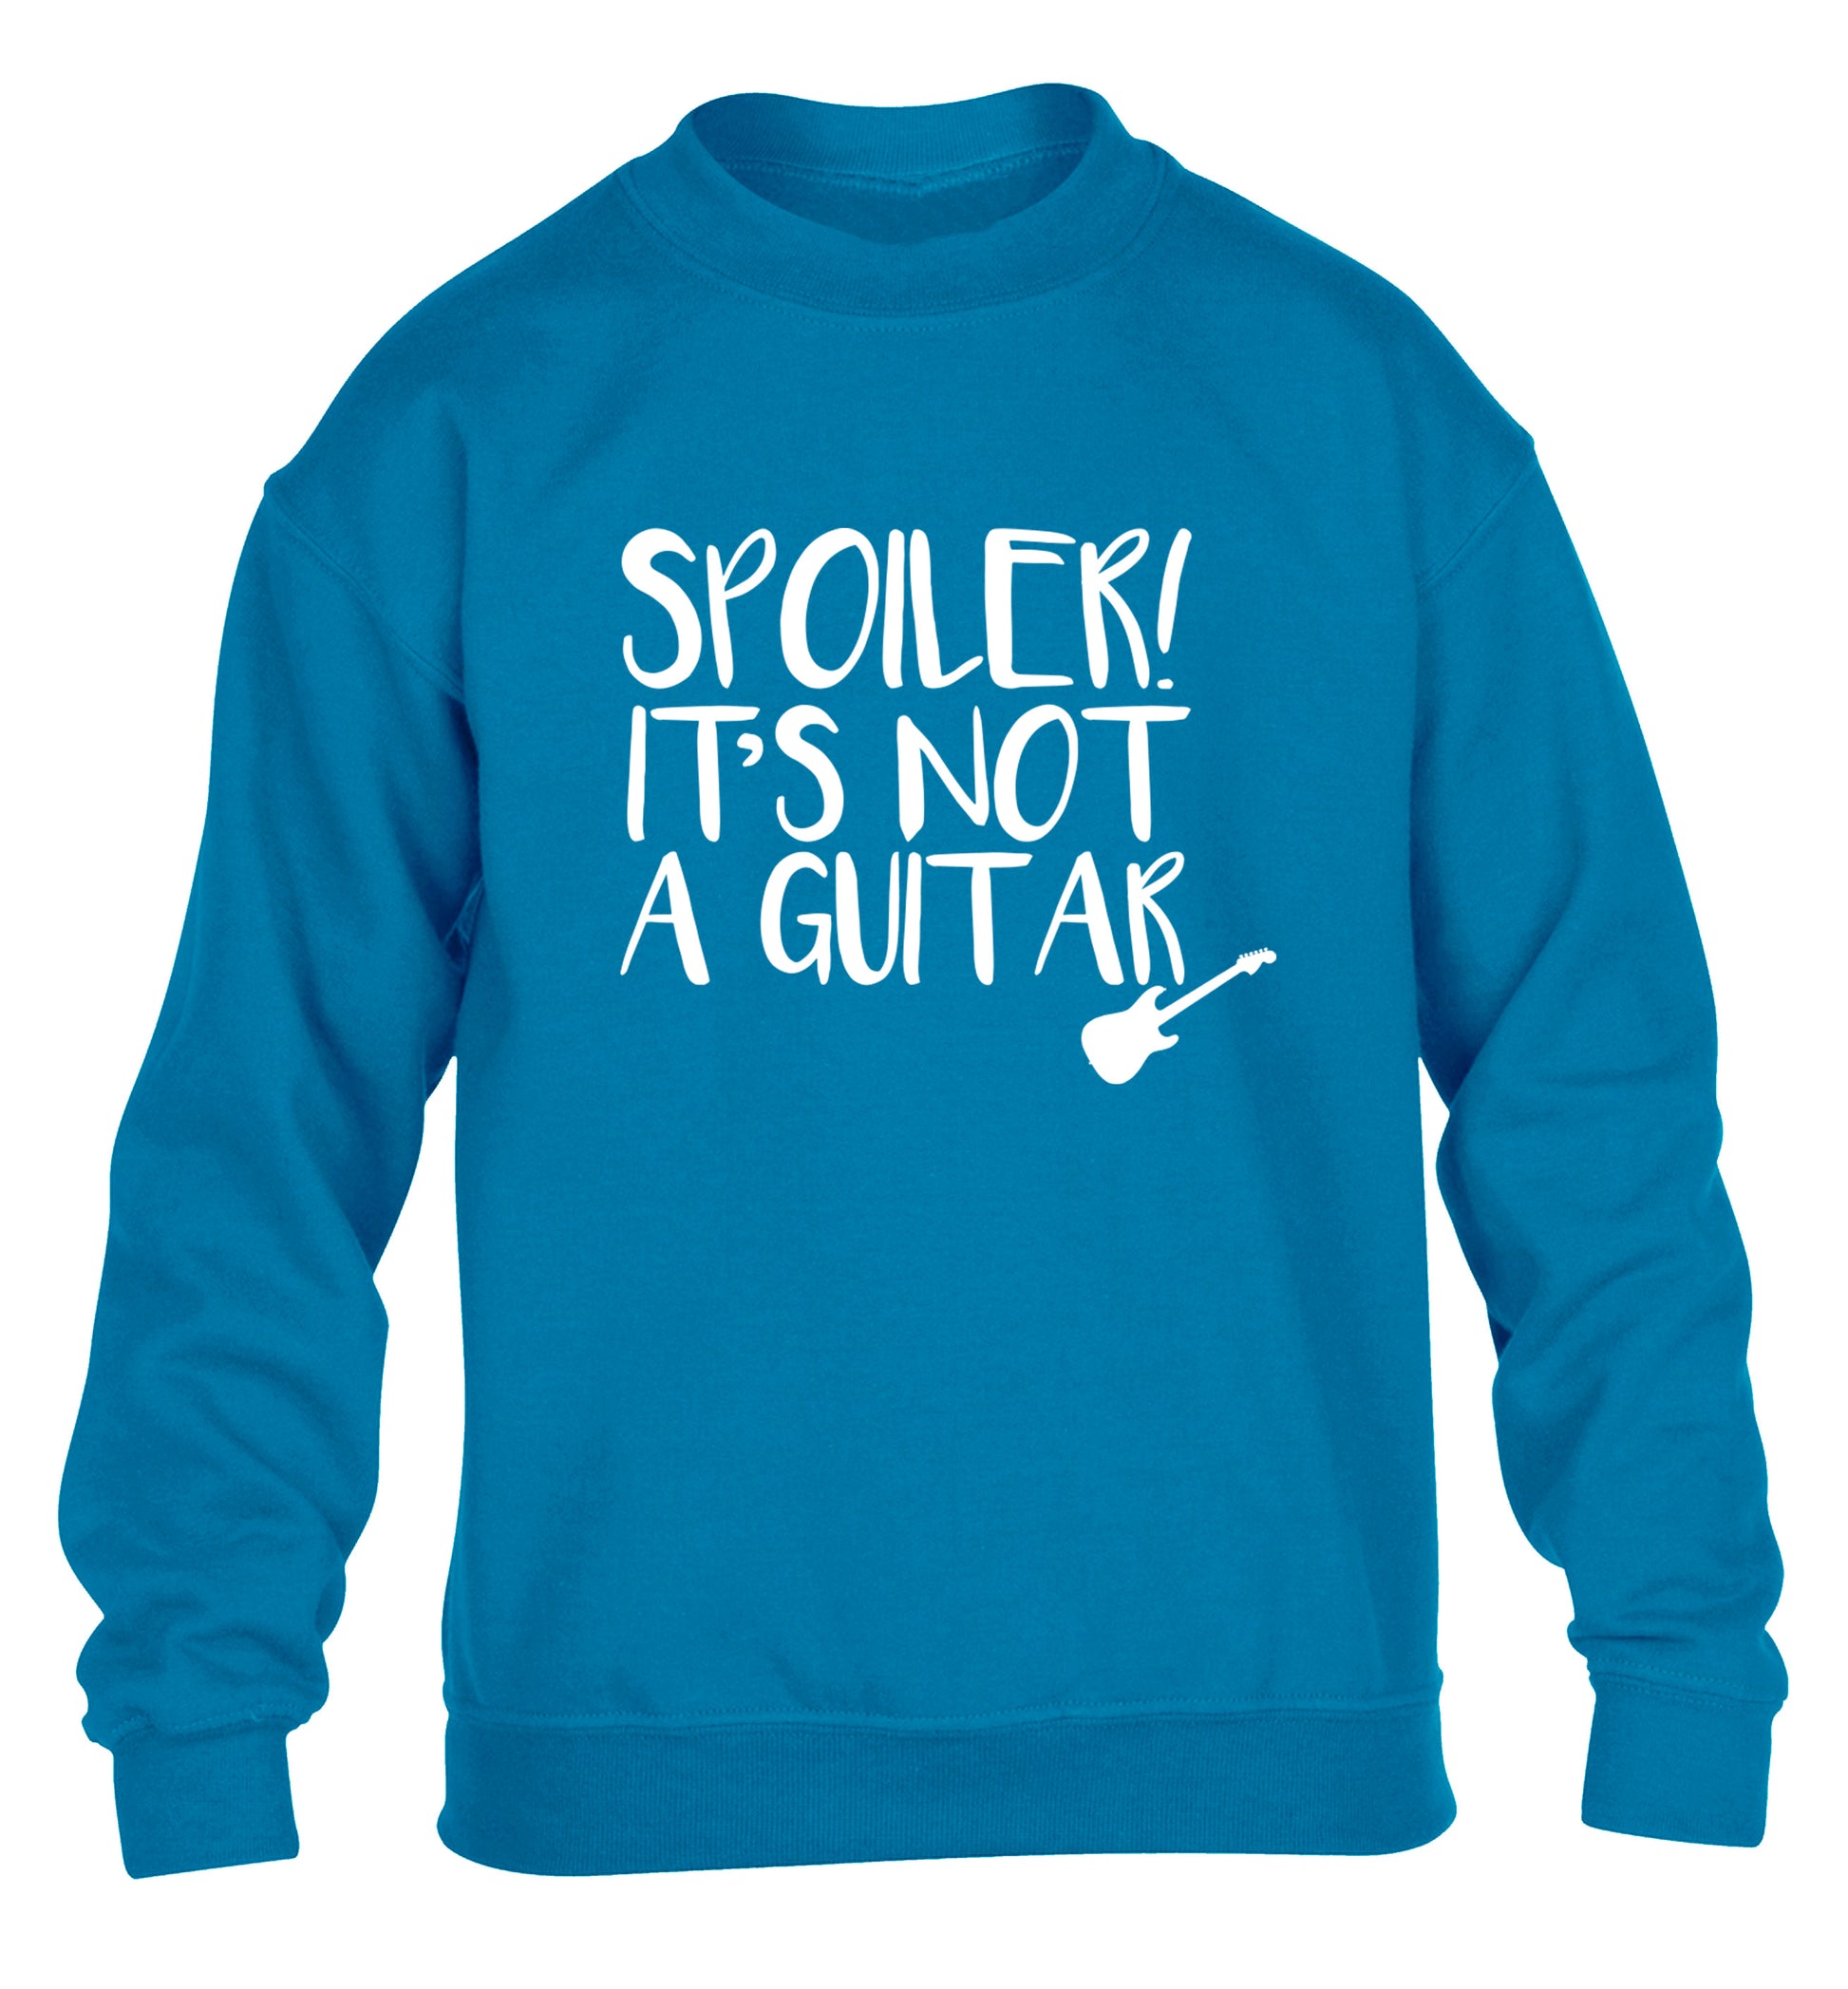 Spoiler it's not a guitar children's blue sweater 12-13 Years